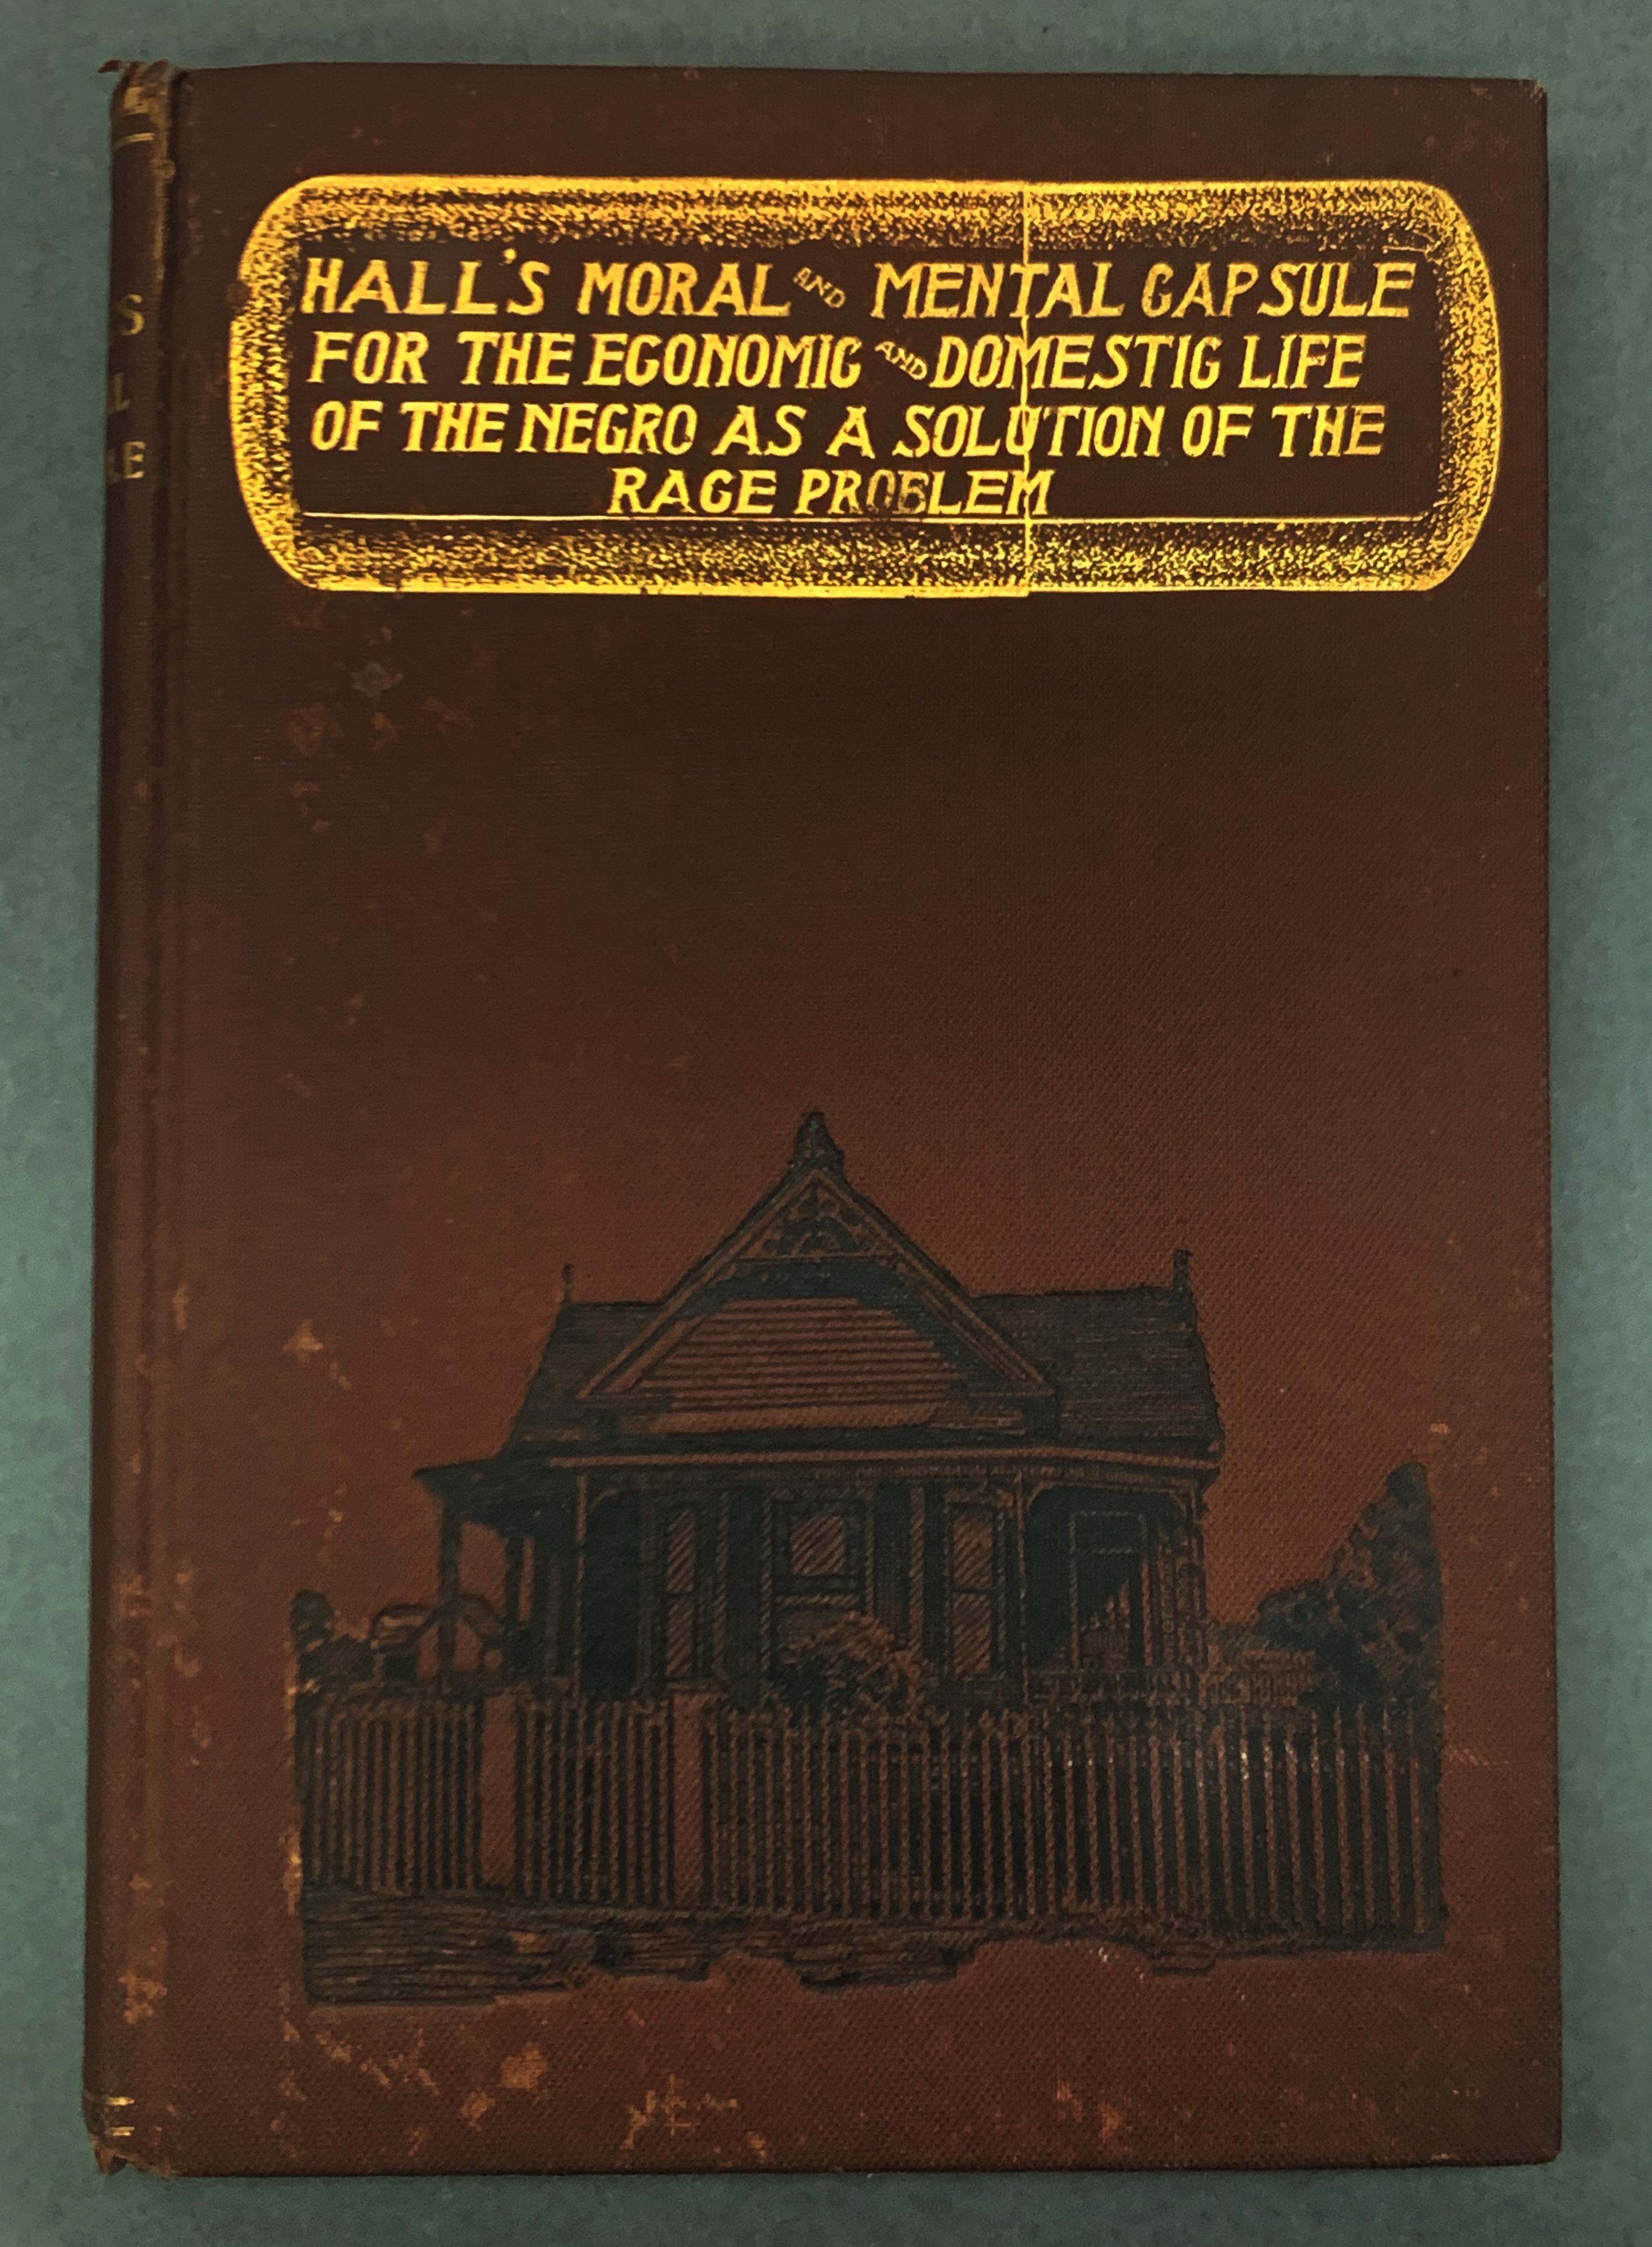 Book with image of a single story Queen Anne's style house. Gold title reads: Hall's Moral and Mental Capsule for the Economic and Domestic Life of the Negro as a Solution of the Race Problem"